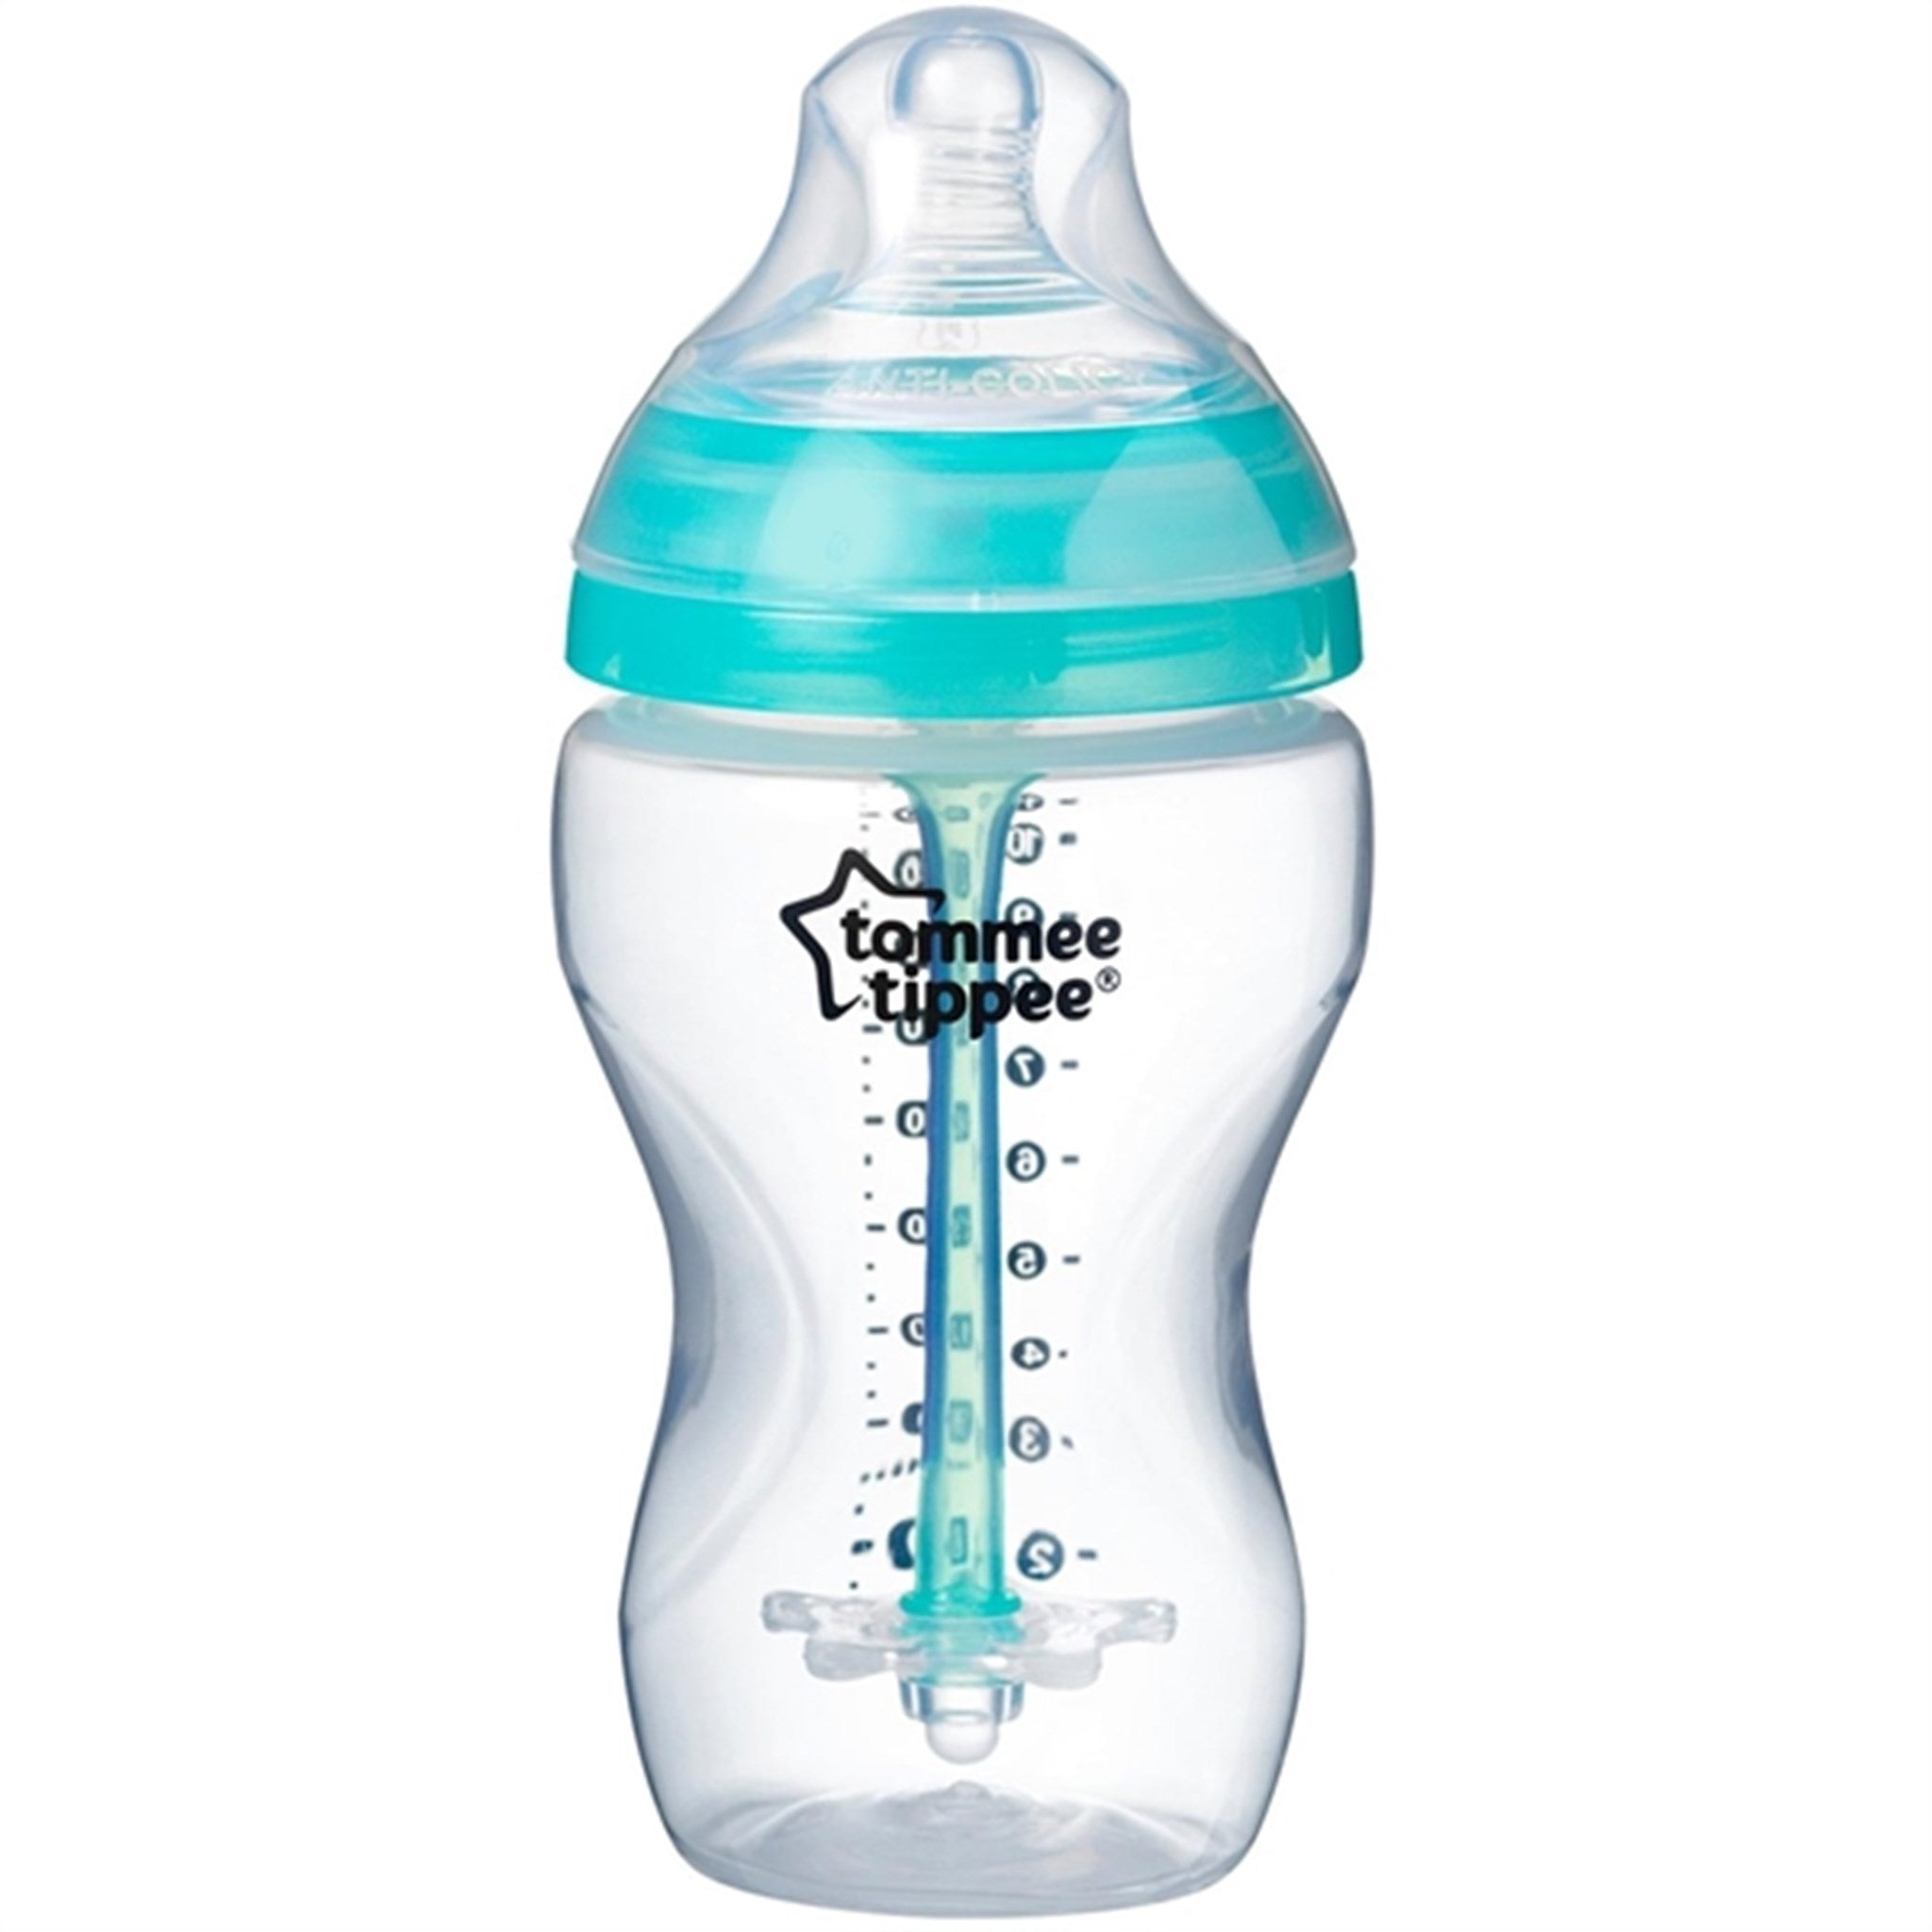 Tommee Tippee Baby bottle w/Heat Indicator - Anti-Colic 340 ml